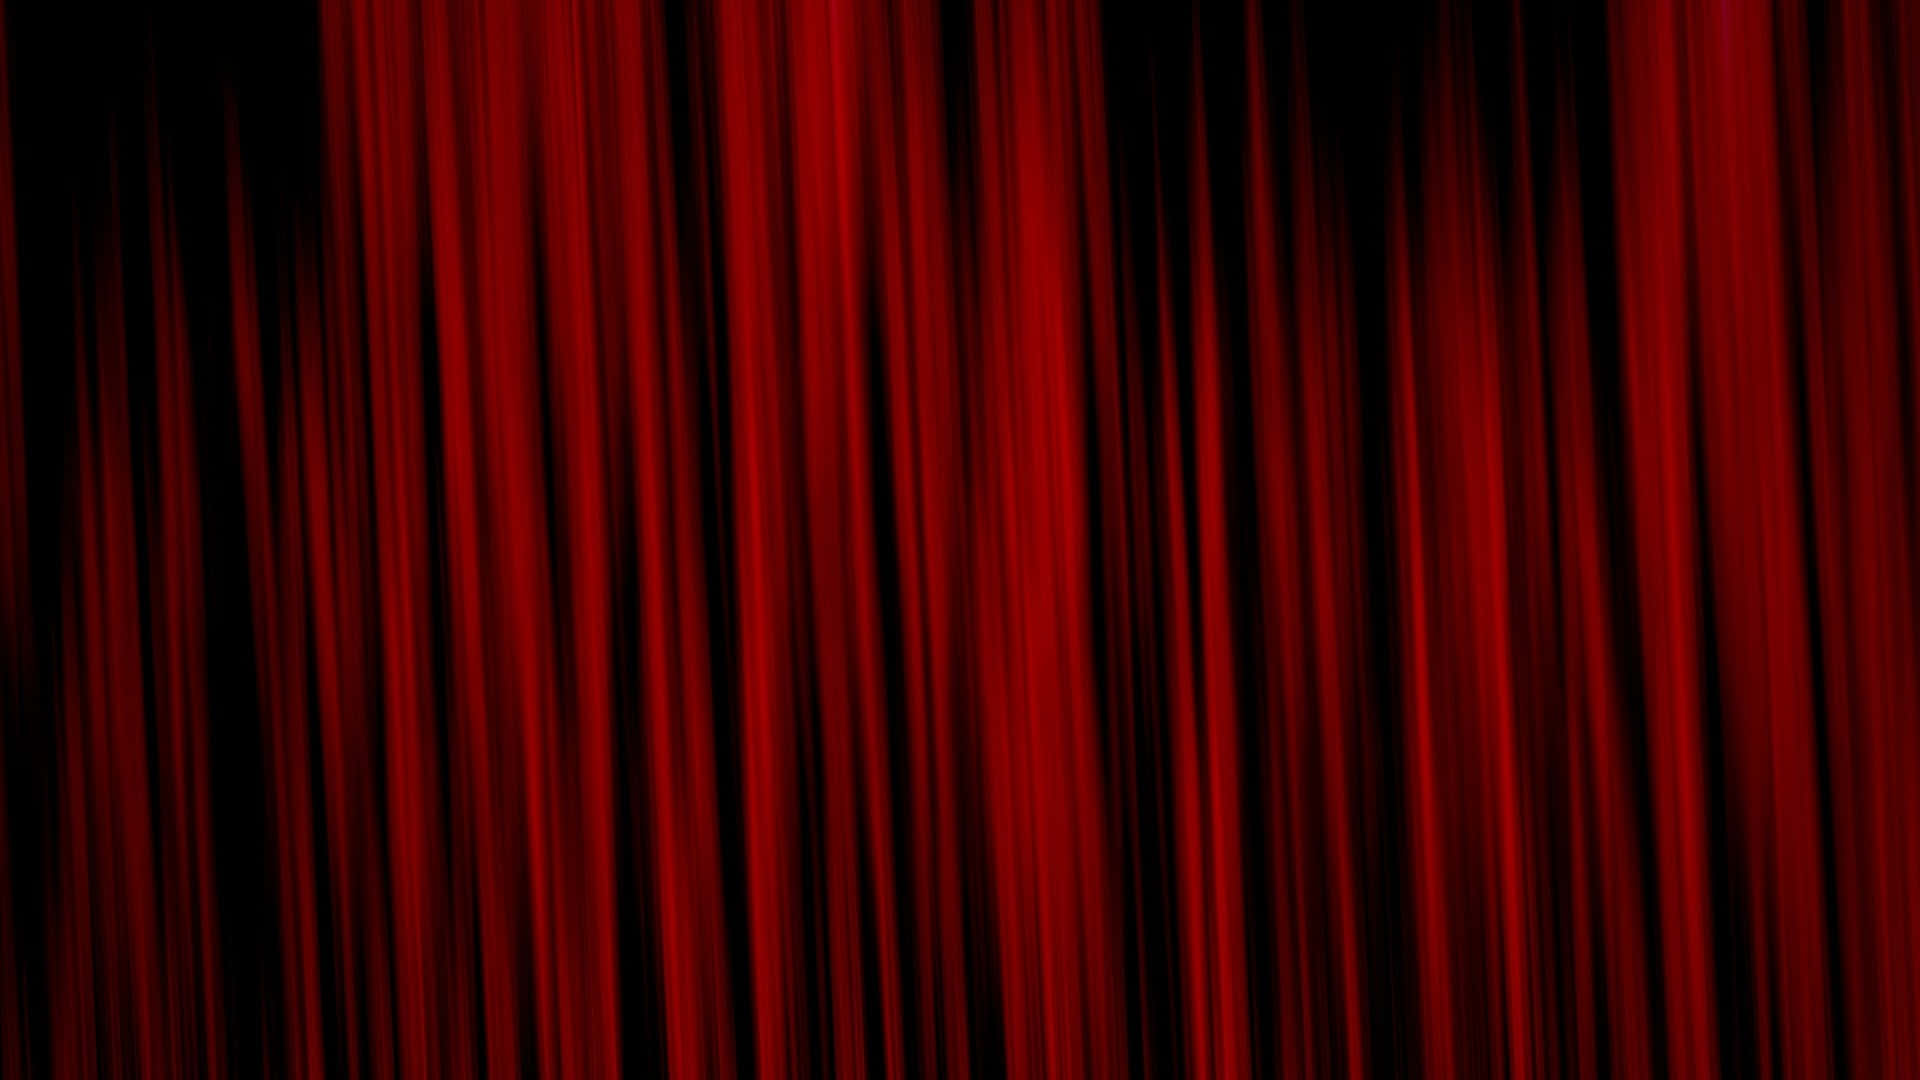 Red Curtain Background - Stock Photos, Royalty Free Images